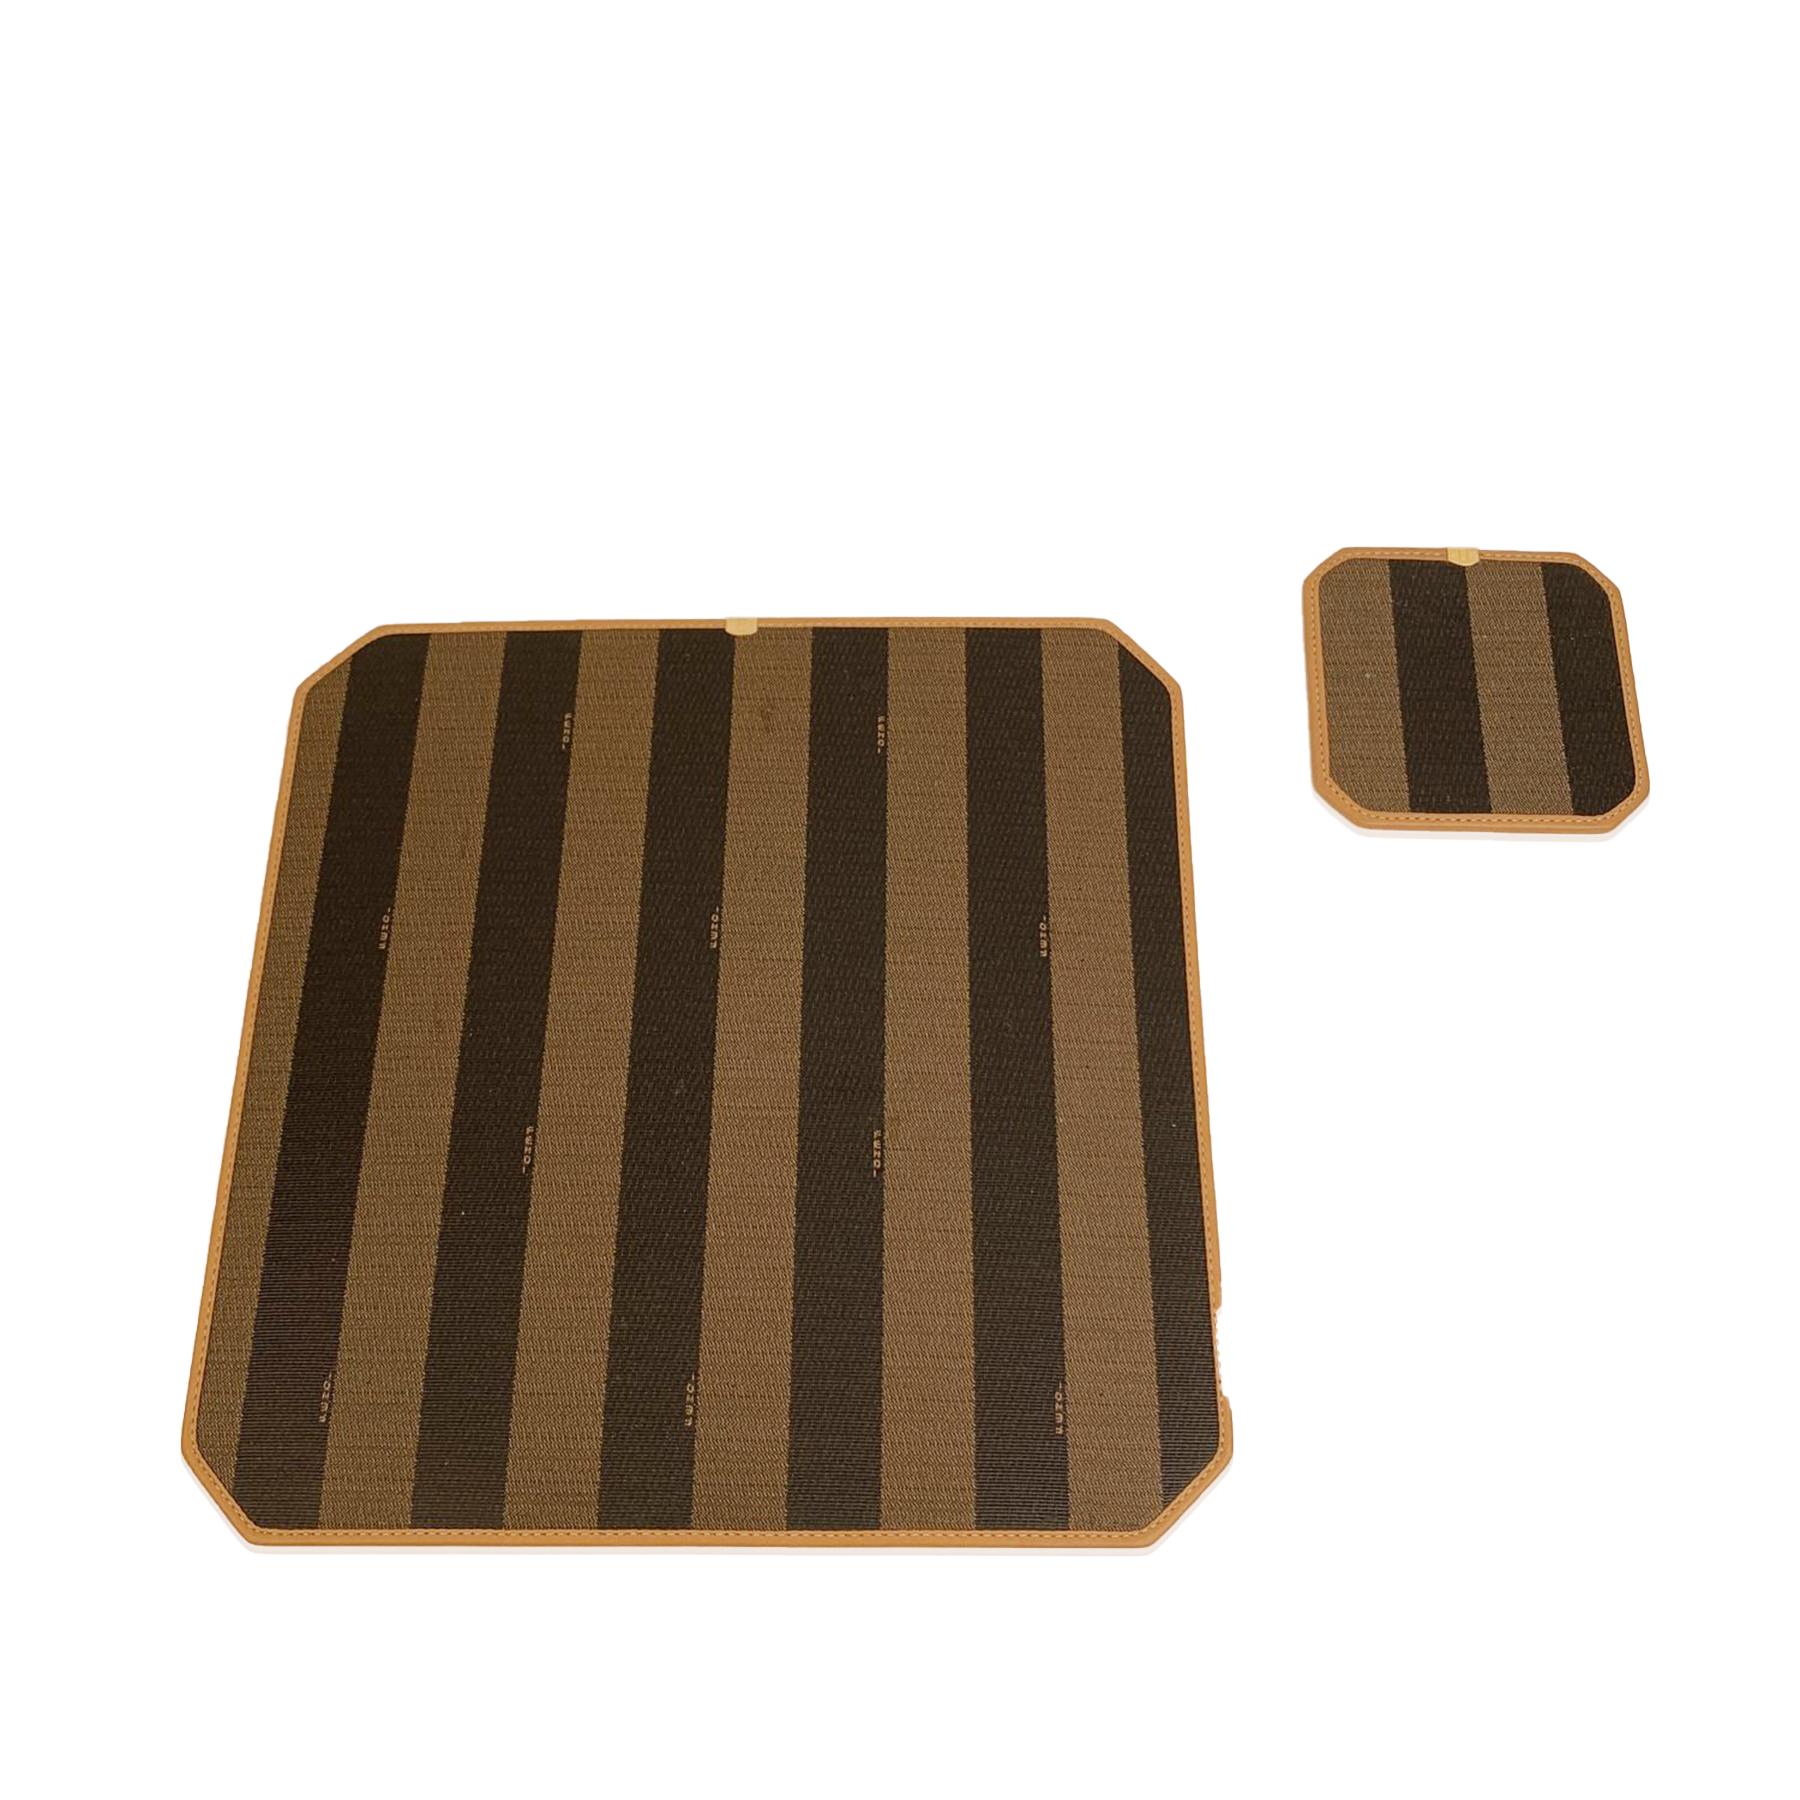 Beautiful vintage Fendi rigid square-shaped placemats and coasters, set of 6. Pequin striped tan and black canvas with genuine leather trim and gold metal hardware. Fendi dustbag included.
Placemat: 13.5 x 13.5 inches - 34,2 x 34,2 cm
Coasters: 4.75